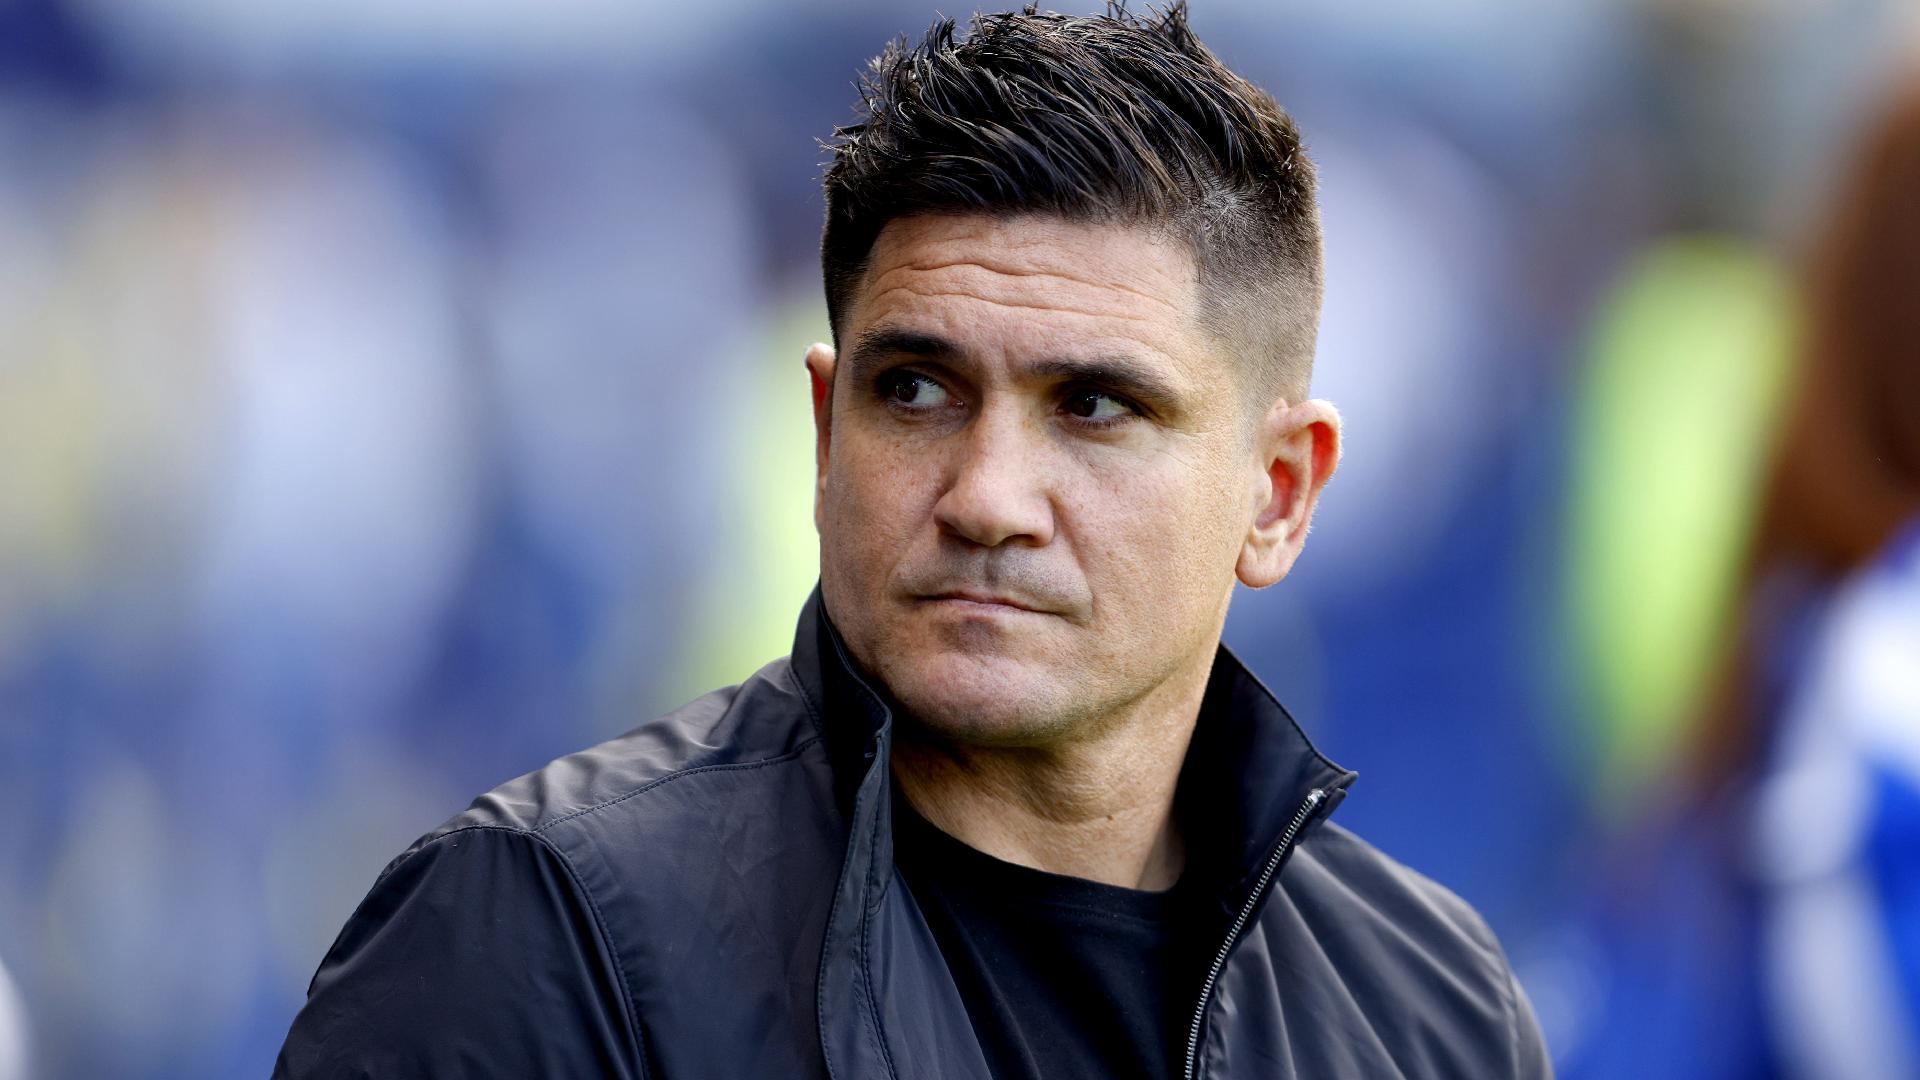 Xisco Munoz calls for unity after Sheffield Wednesday fans chant for his sacking